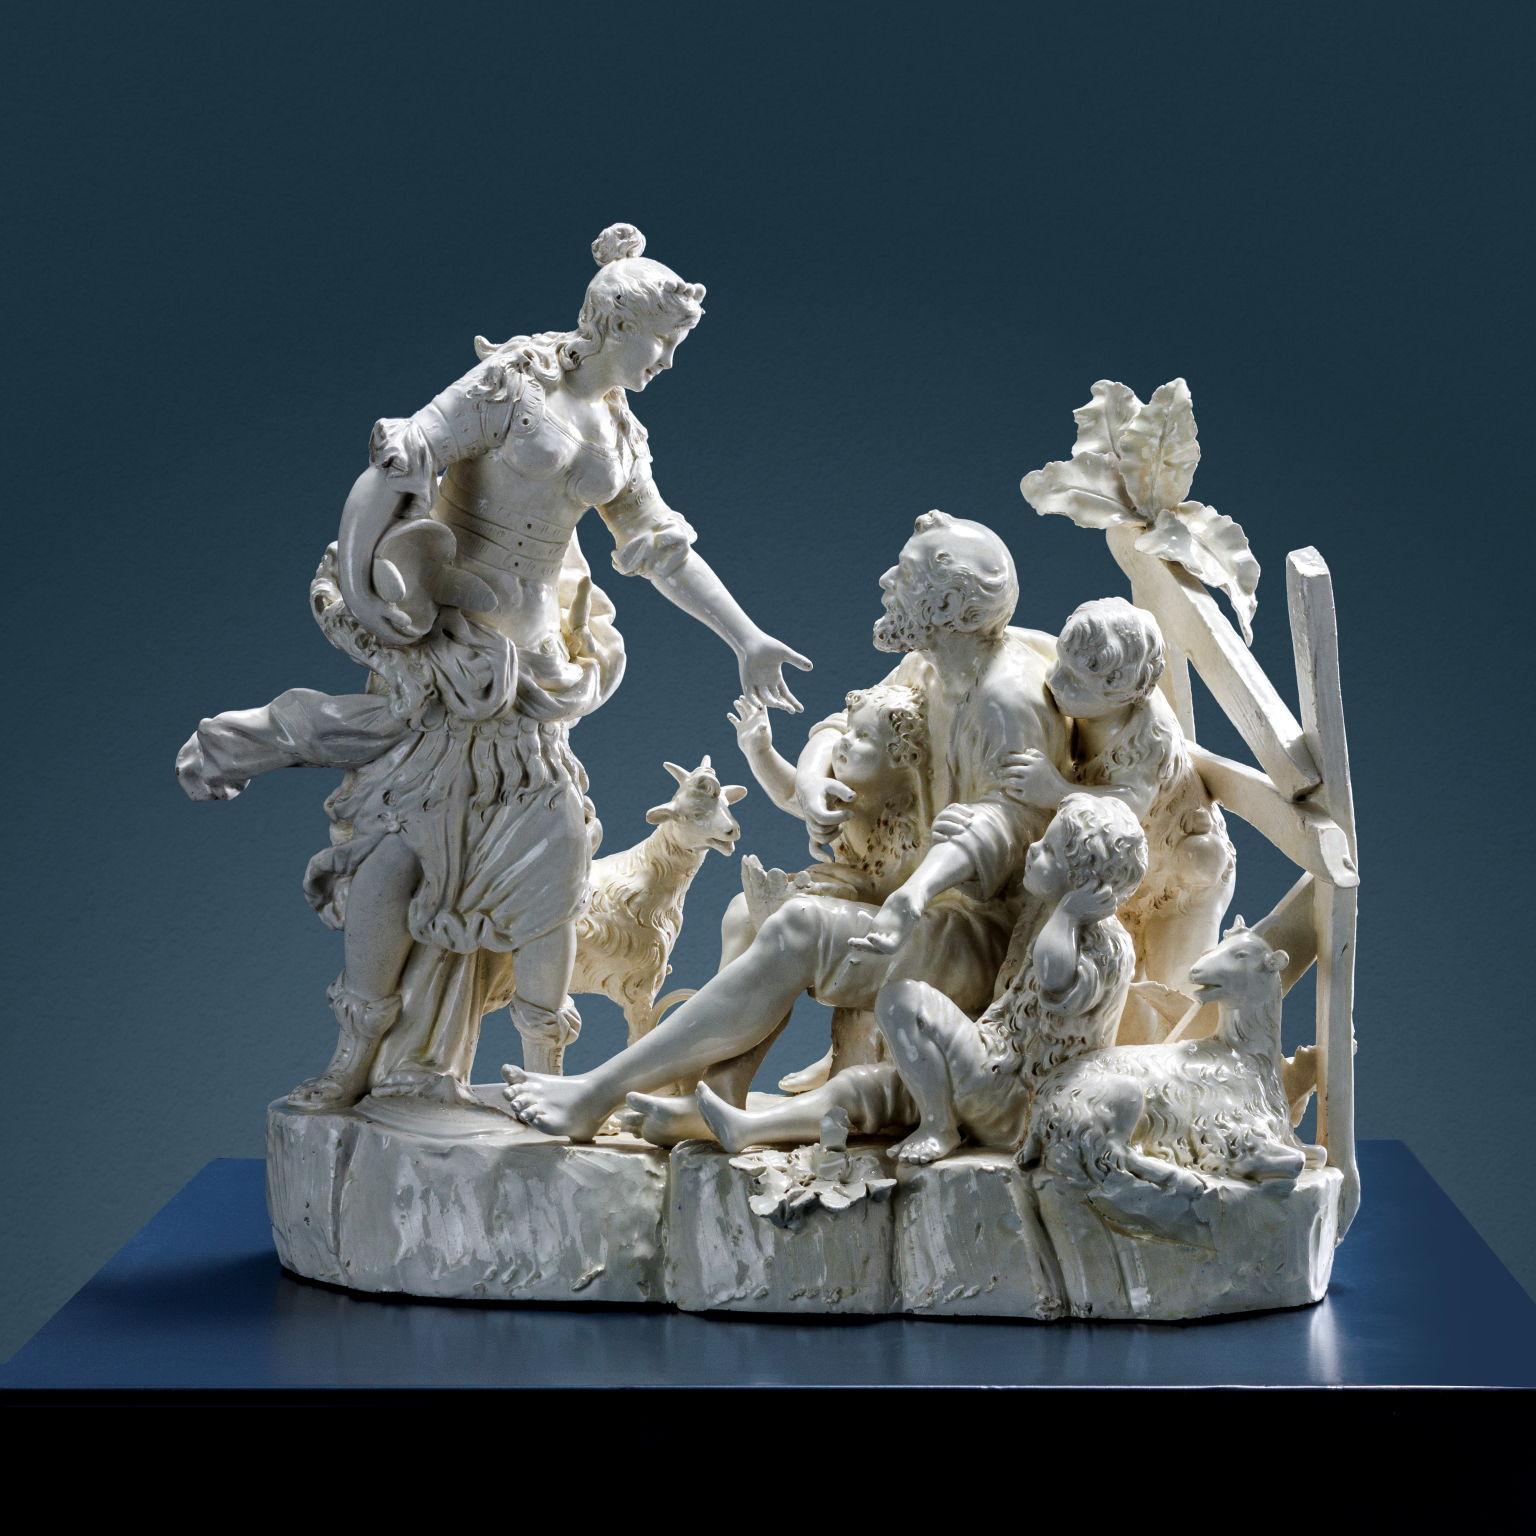 White glazed ceramic depicting Erminia among shepherds. Erminia is shown from the side, standing with her robe in the wind, helmet under her arm, and shield at her feet; she is stretched toward the shepherd seated on a log as he weaves a basket with